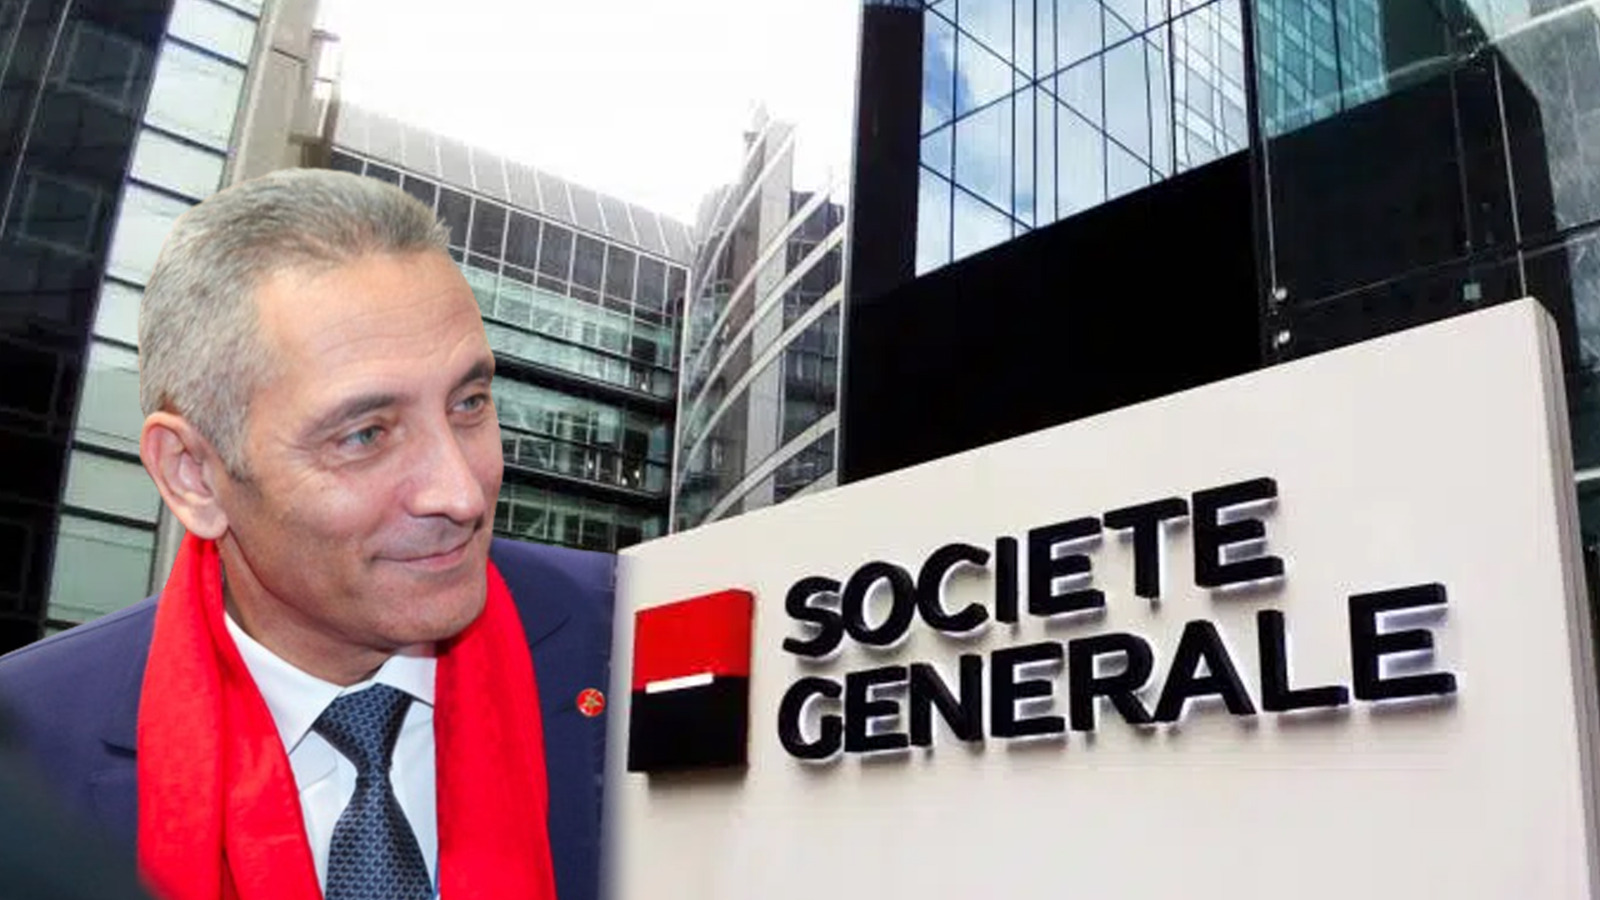 France’s Société Generale to sell its business in Morocco – media reports